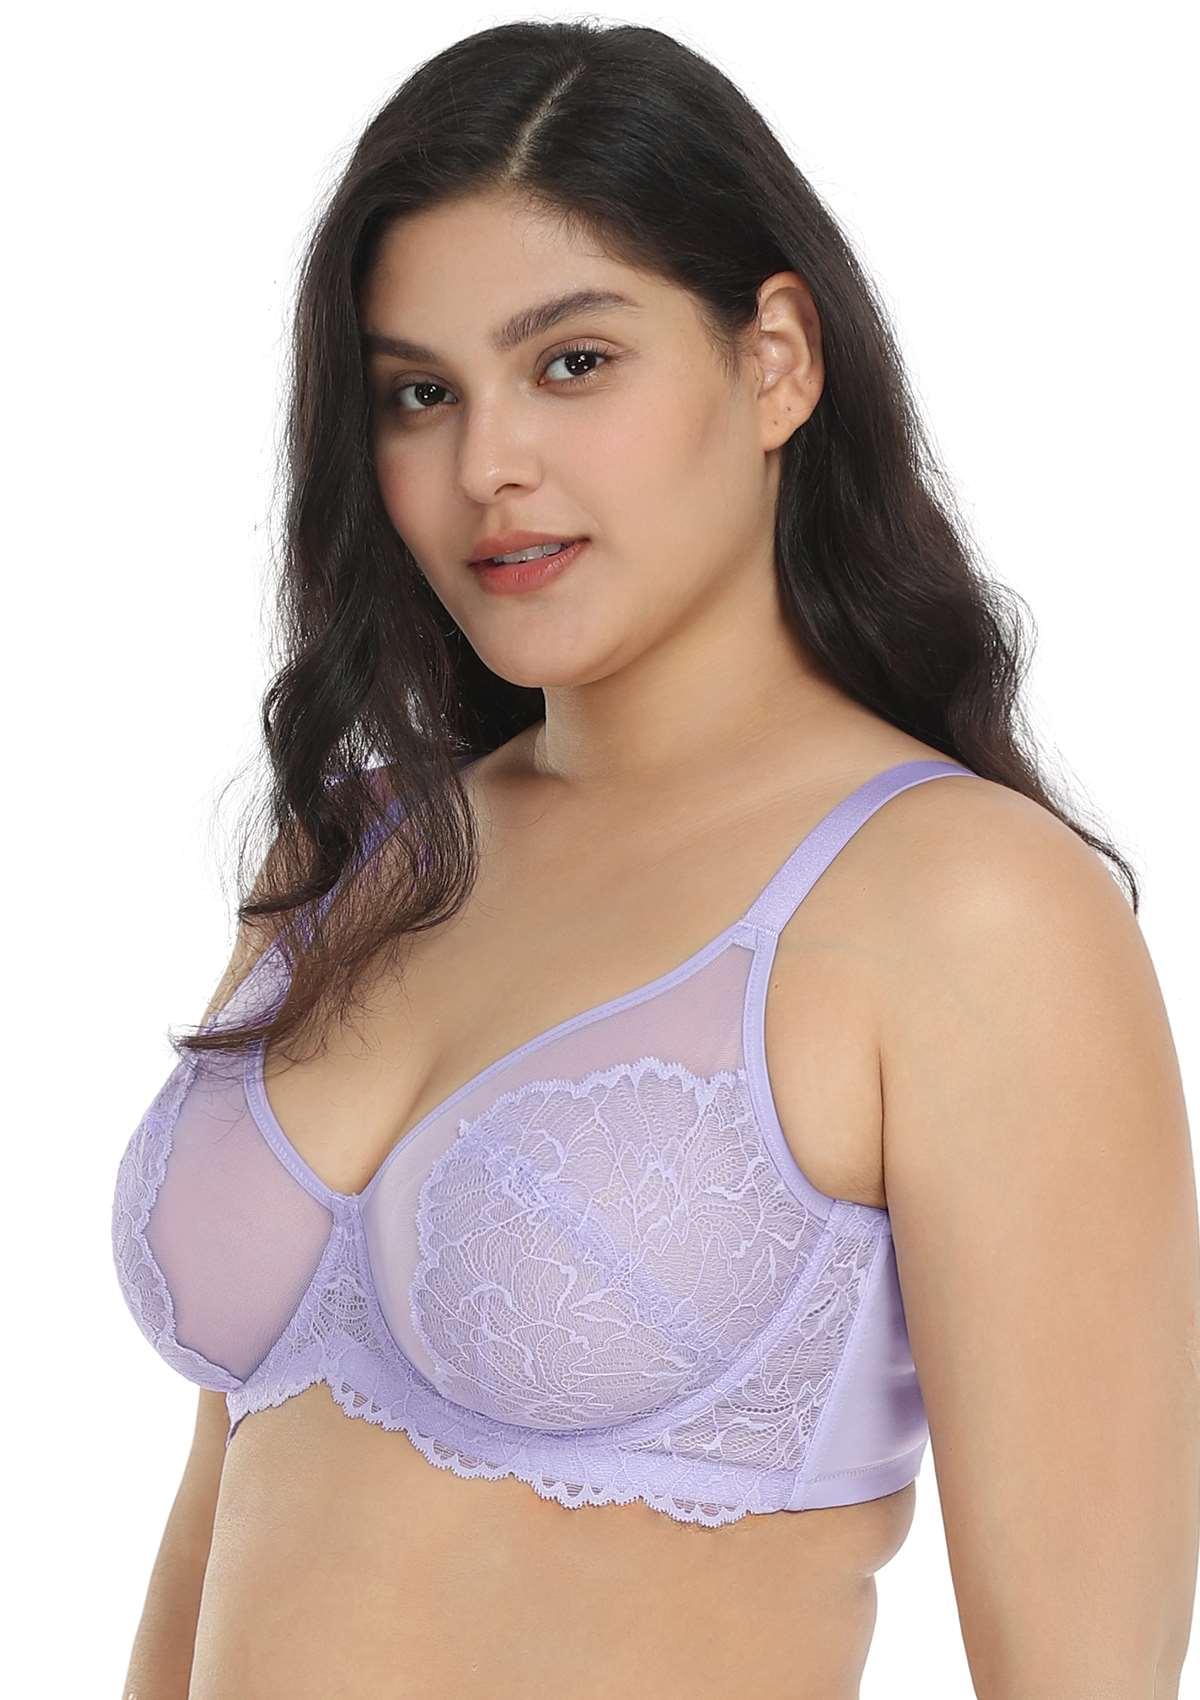 HSIA Blossom Transparent Lace Bra: Plus Size Wired Back Smoothing Bra - Purple / 36 / DD/E